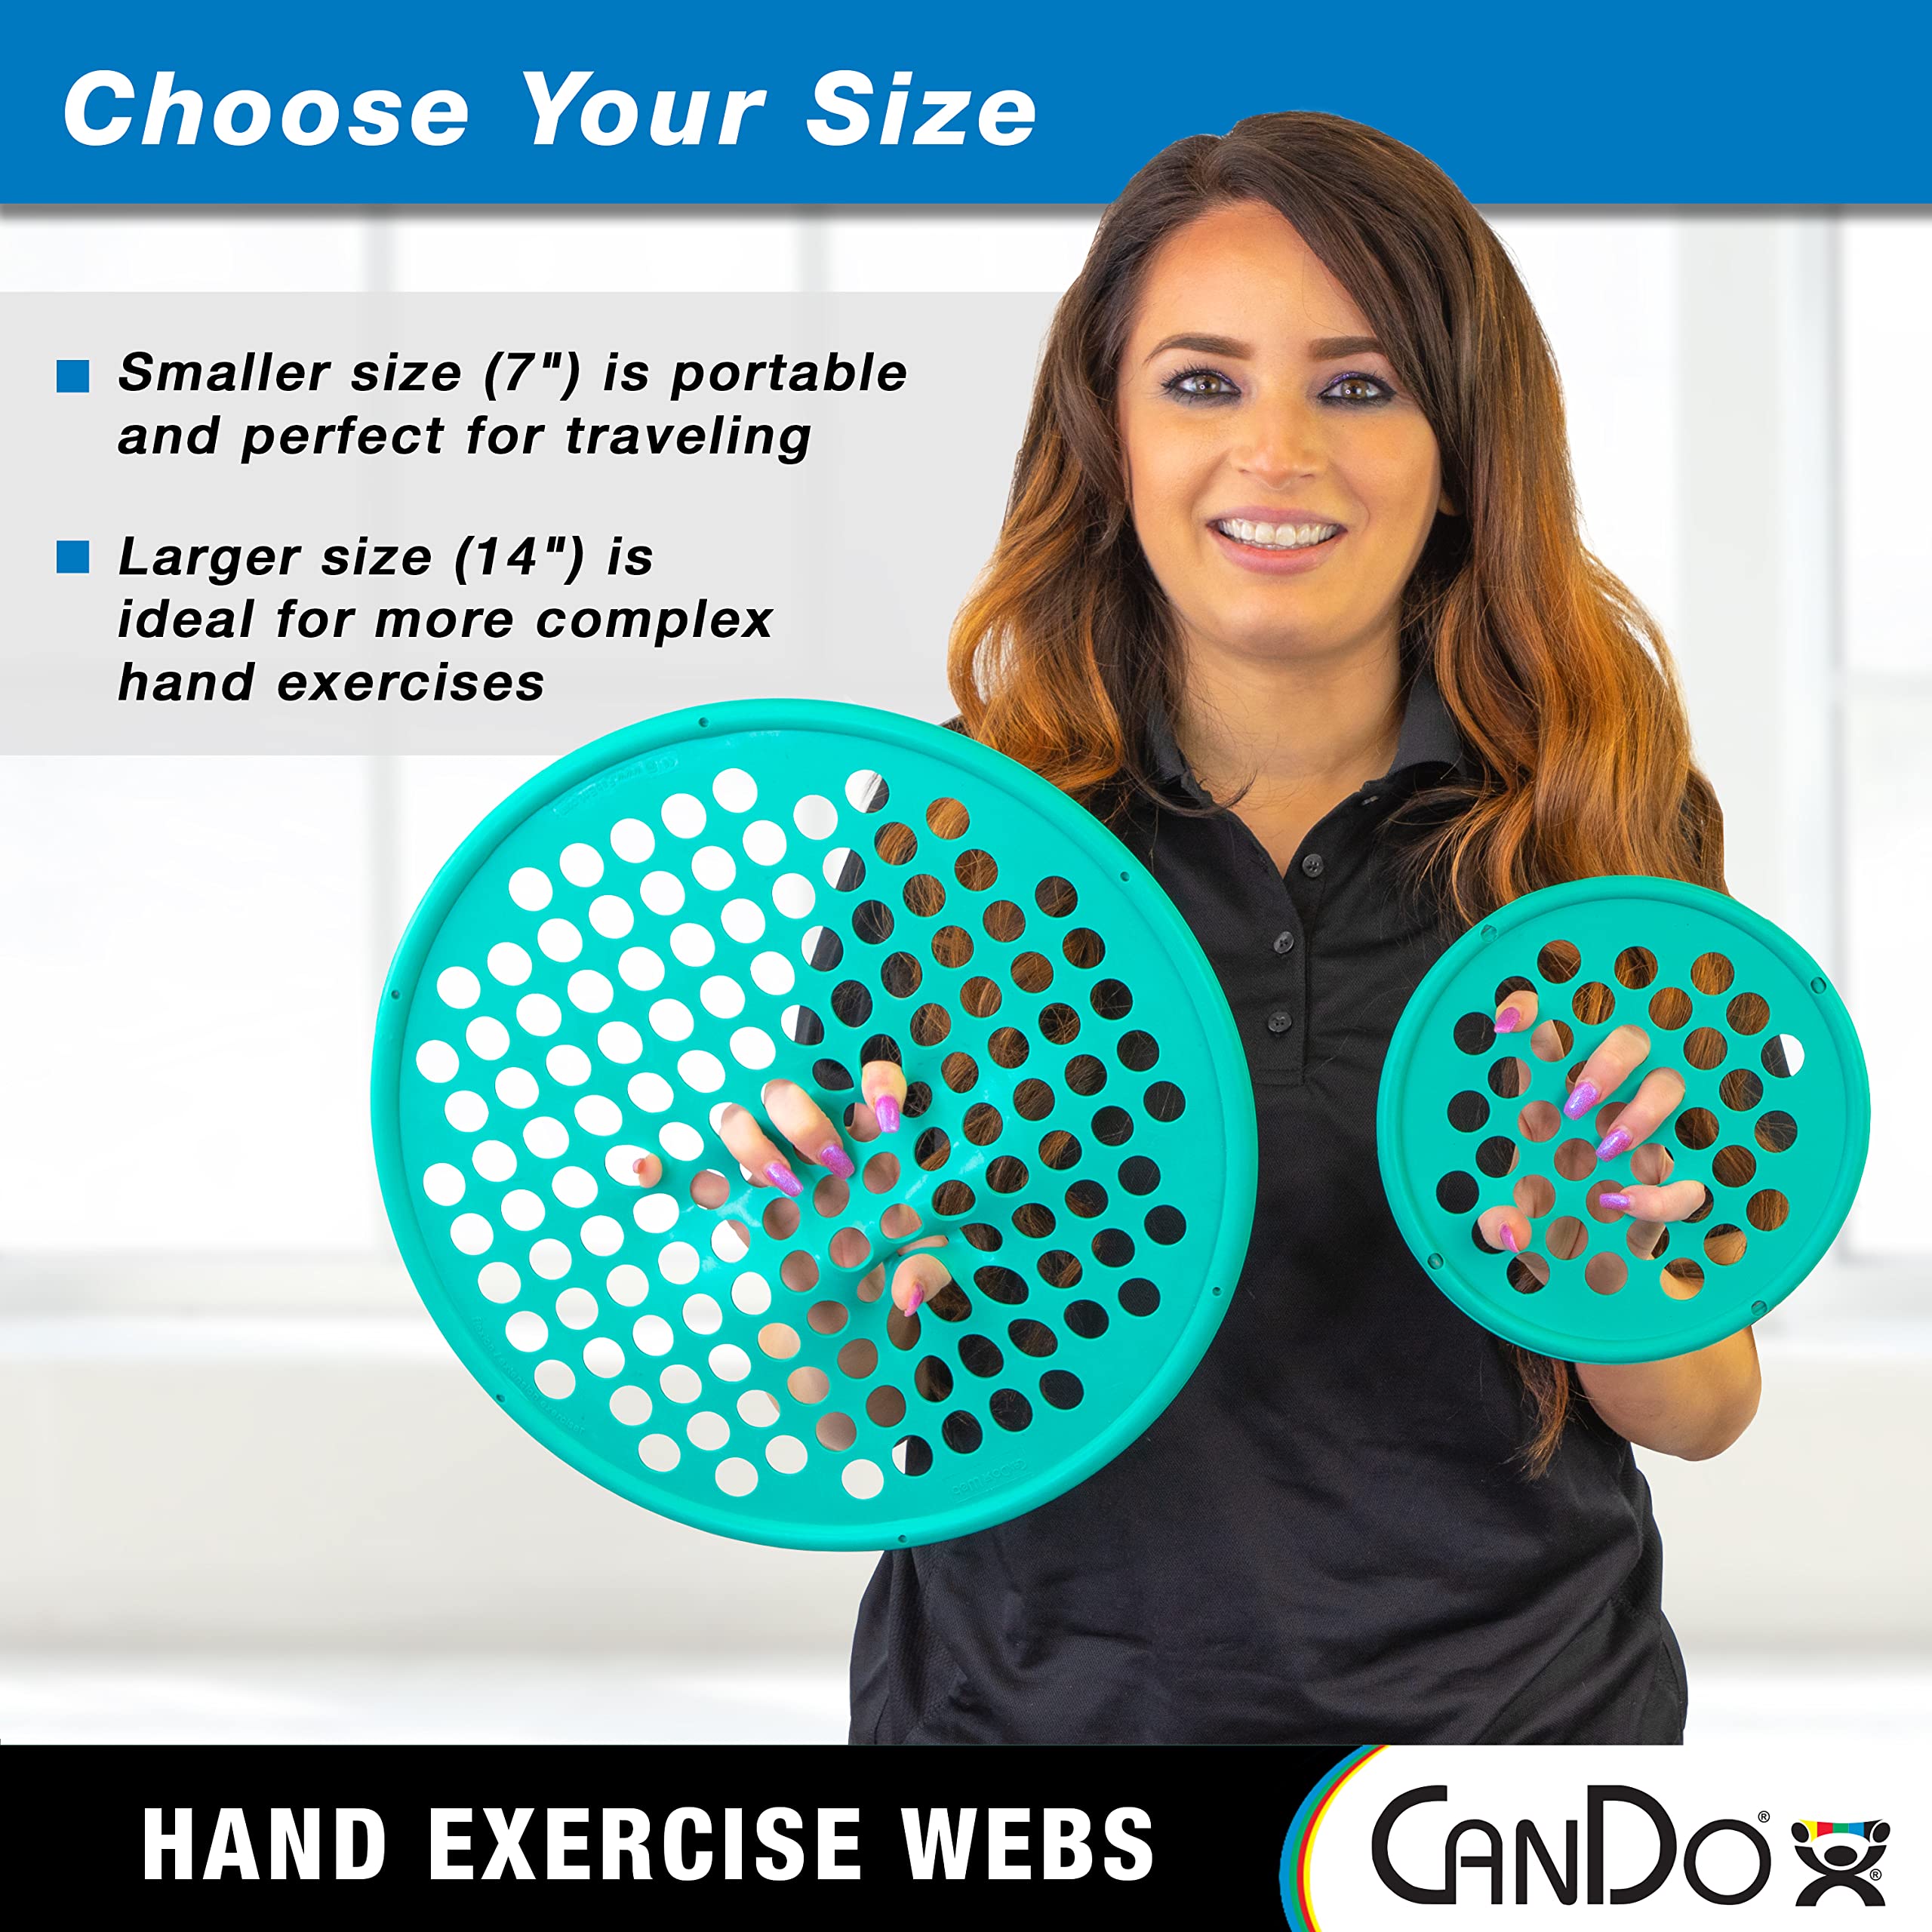 CanDo Hand Exercise Webs for Physical Therapy, Grip Strengthening, and Hand, Finger, Wrist Resistance Workouts, Portable Size, Latex Free, 14